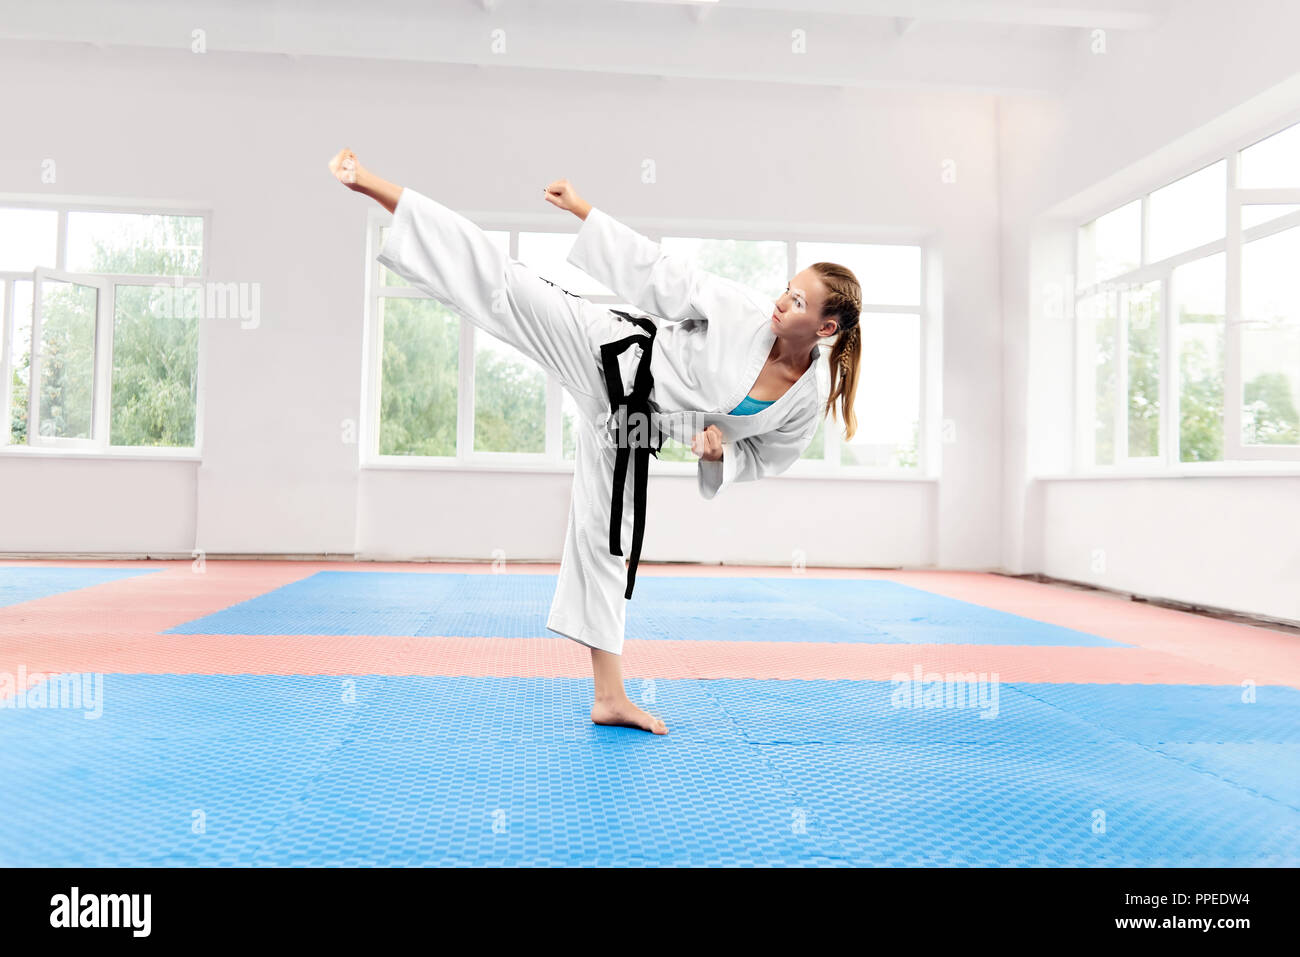 Sporty karate woman in white kimono with black belt against big window standing in karate position at fight class. Female fighter with blue eyes and braided hair improving technique of fight. Stock Photo